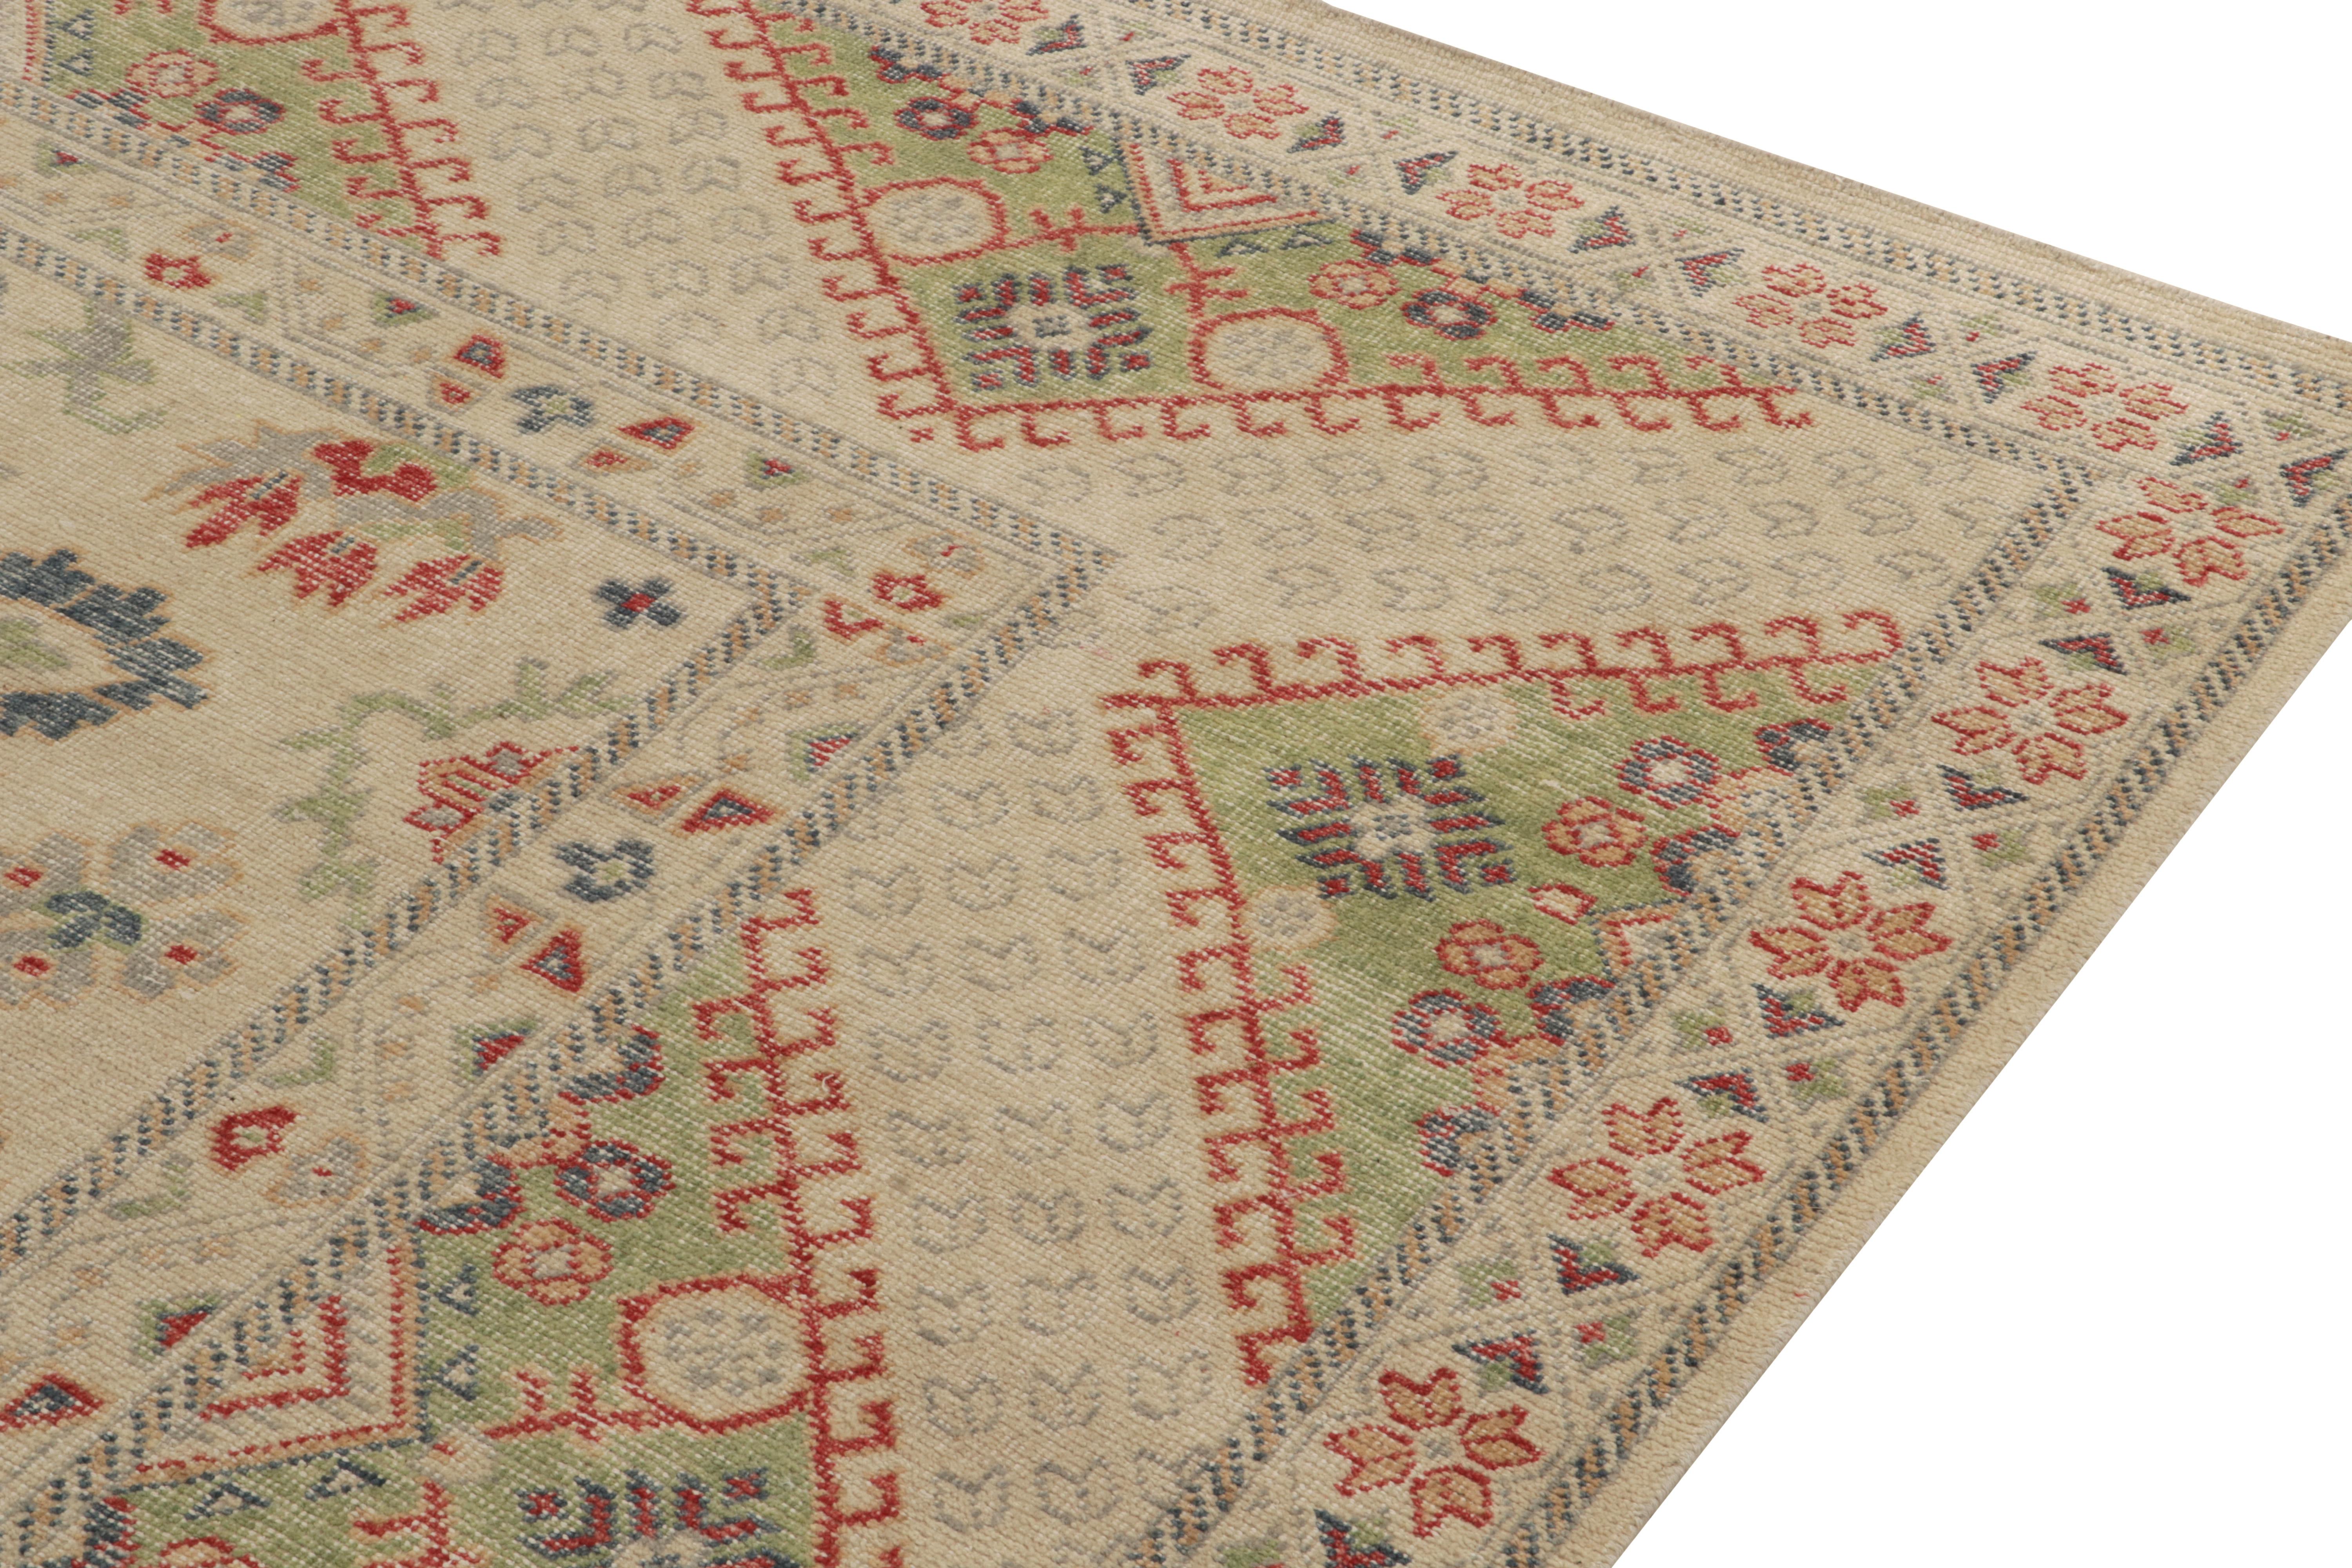 Indian Rug & Kilim’s Distressed Ghiordes Style Rug in Greige, Green, Red Medallion For Sale